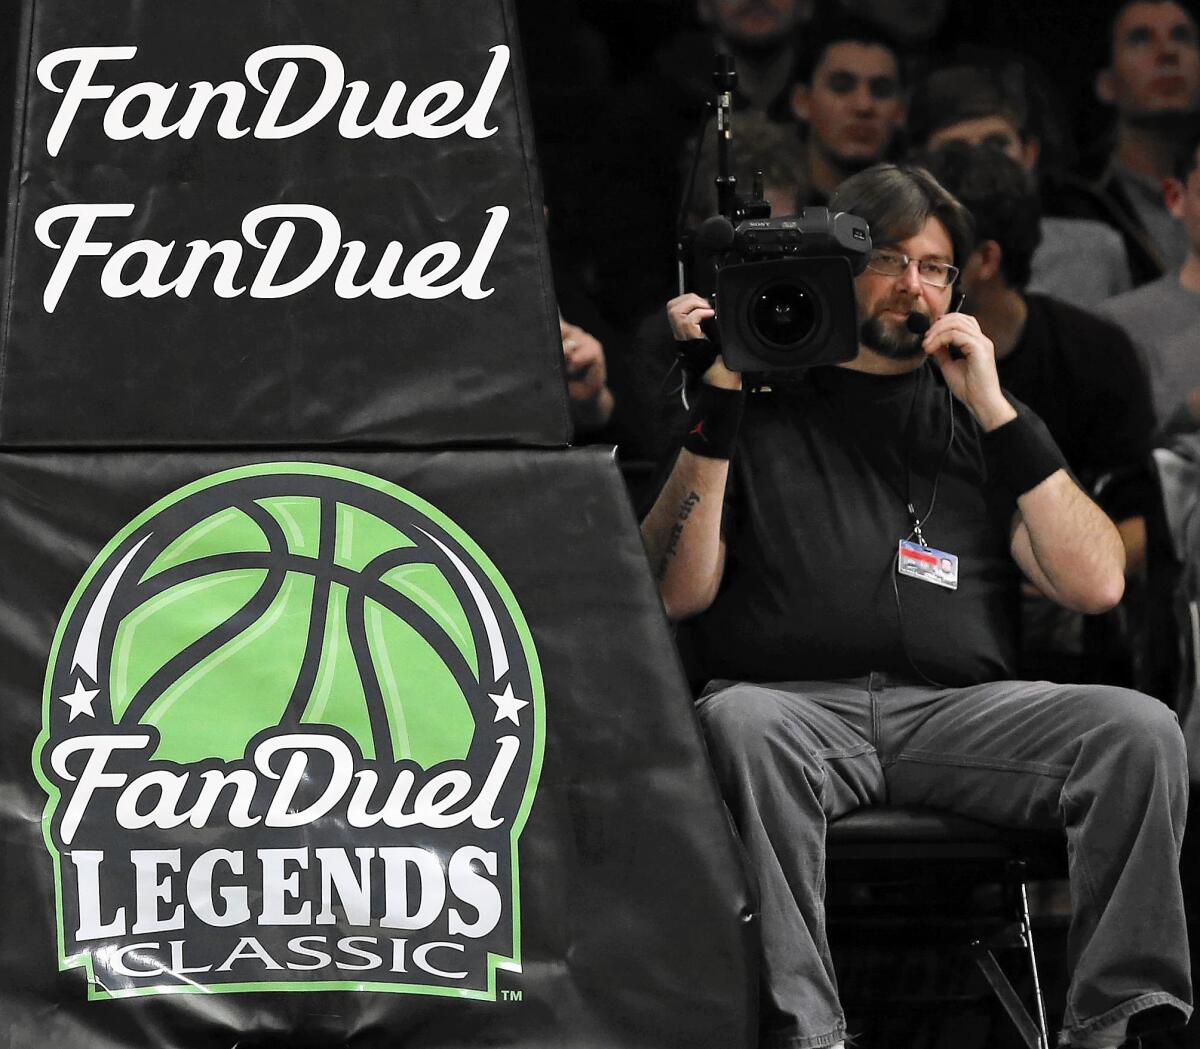 FanDuel advertising covers the post at the Barclays Center in New York.